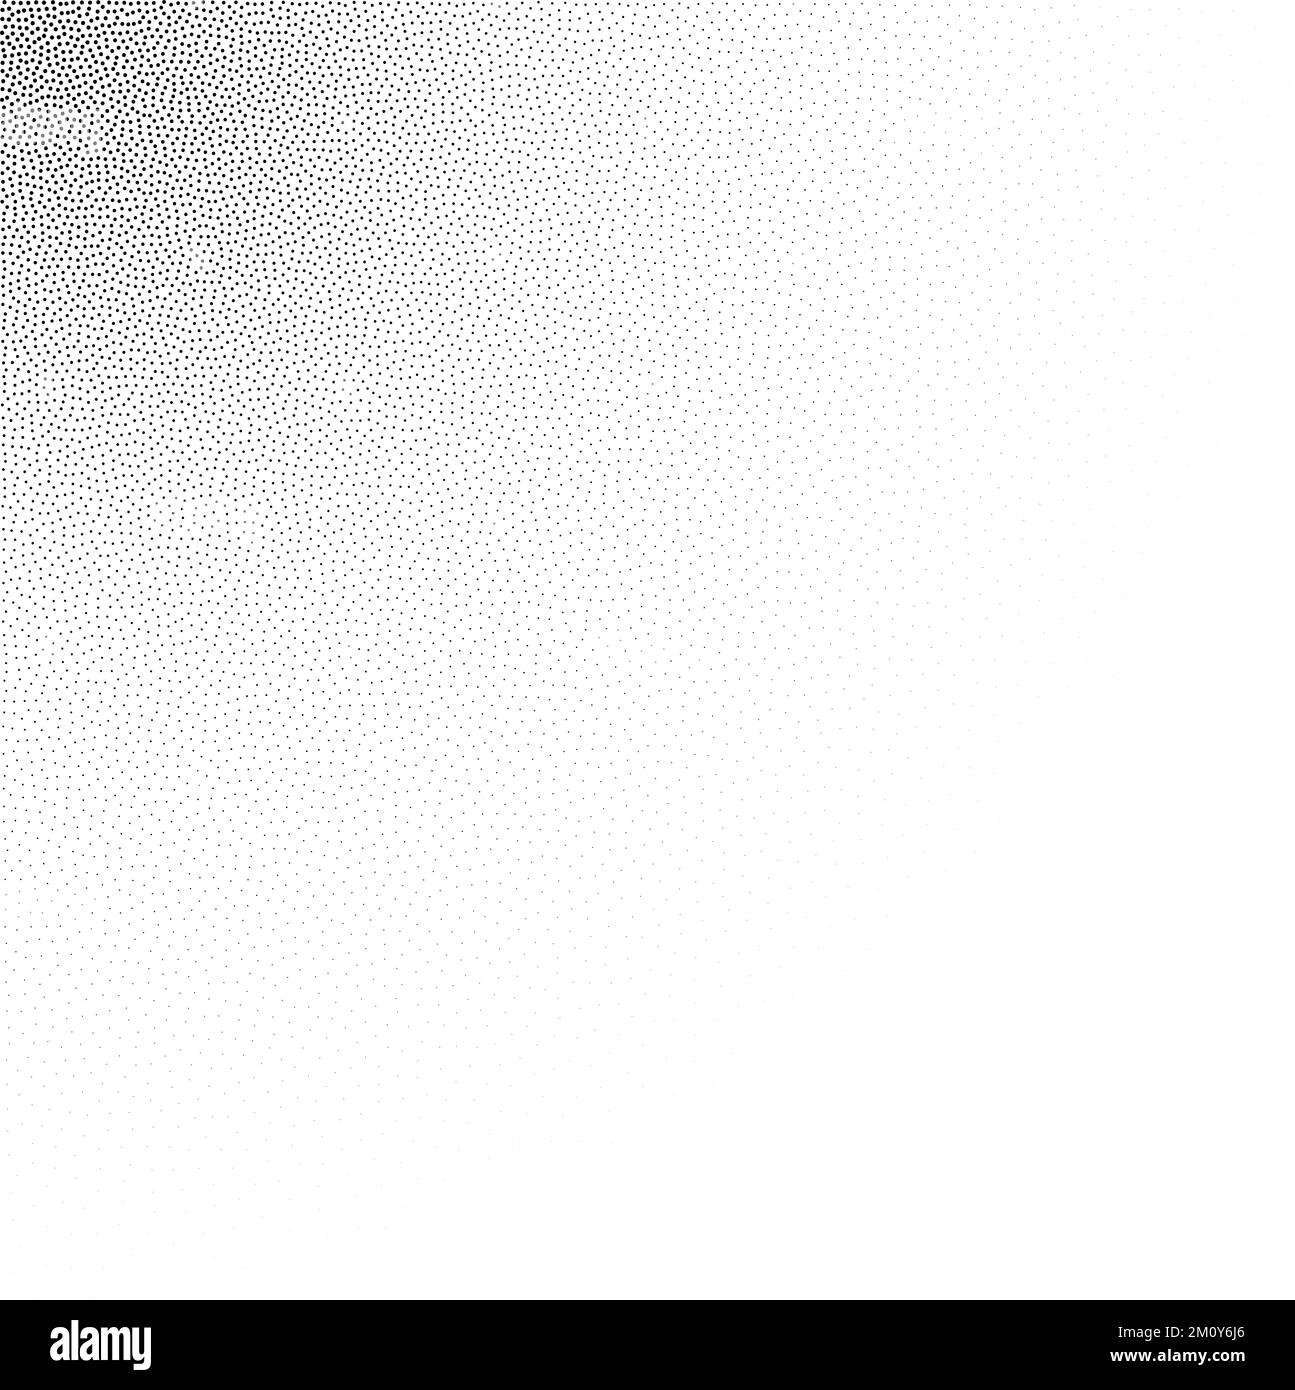 Grain stippled gradient background. Faded stochastic dotwork texture. Random grunge noise. Black dots, speckles or particles wallpaper. Halftone Stock Vector